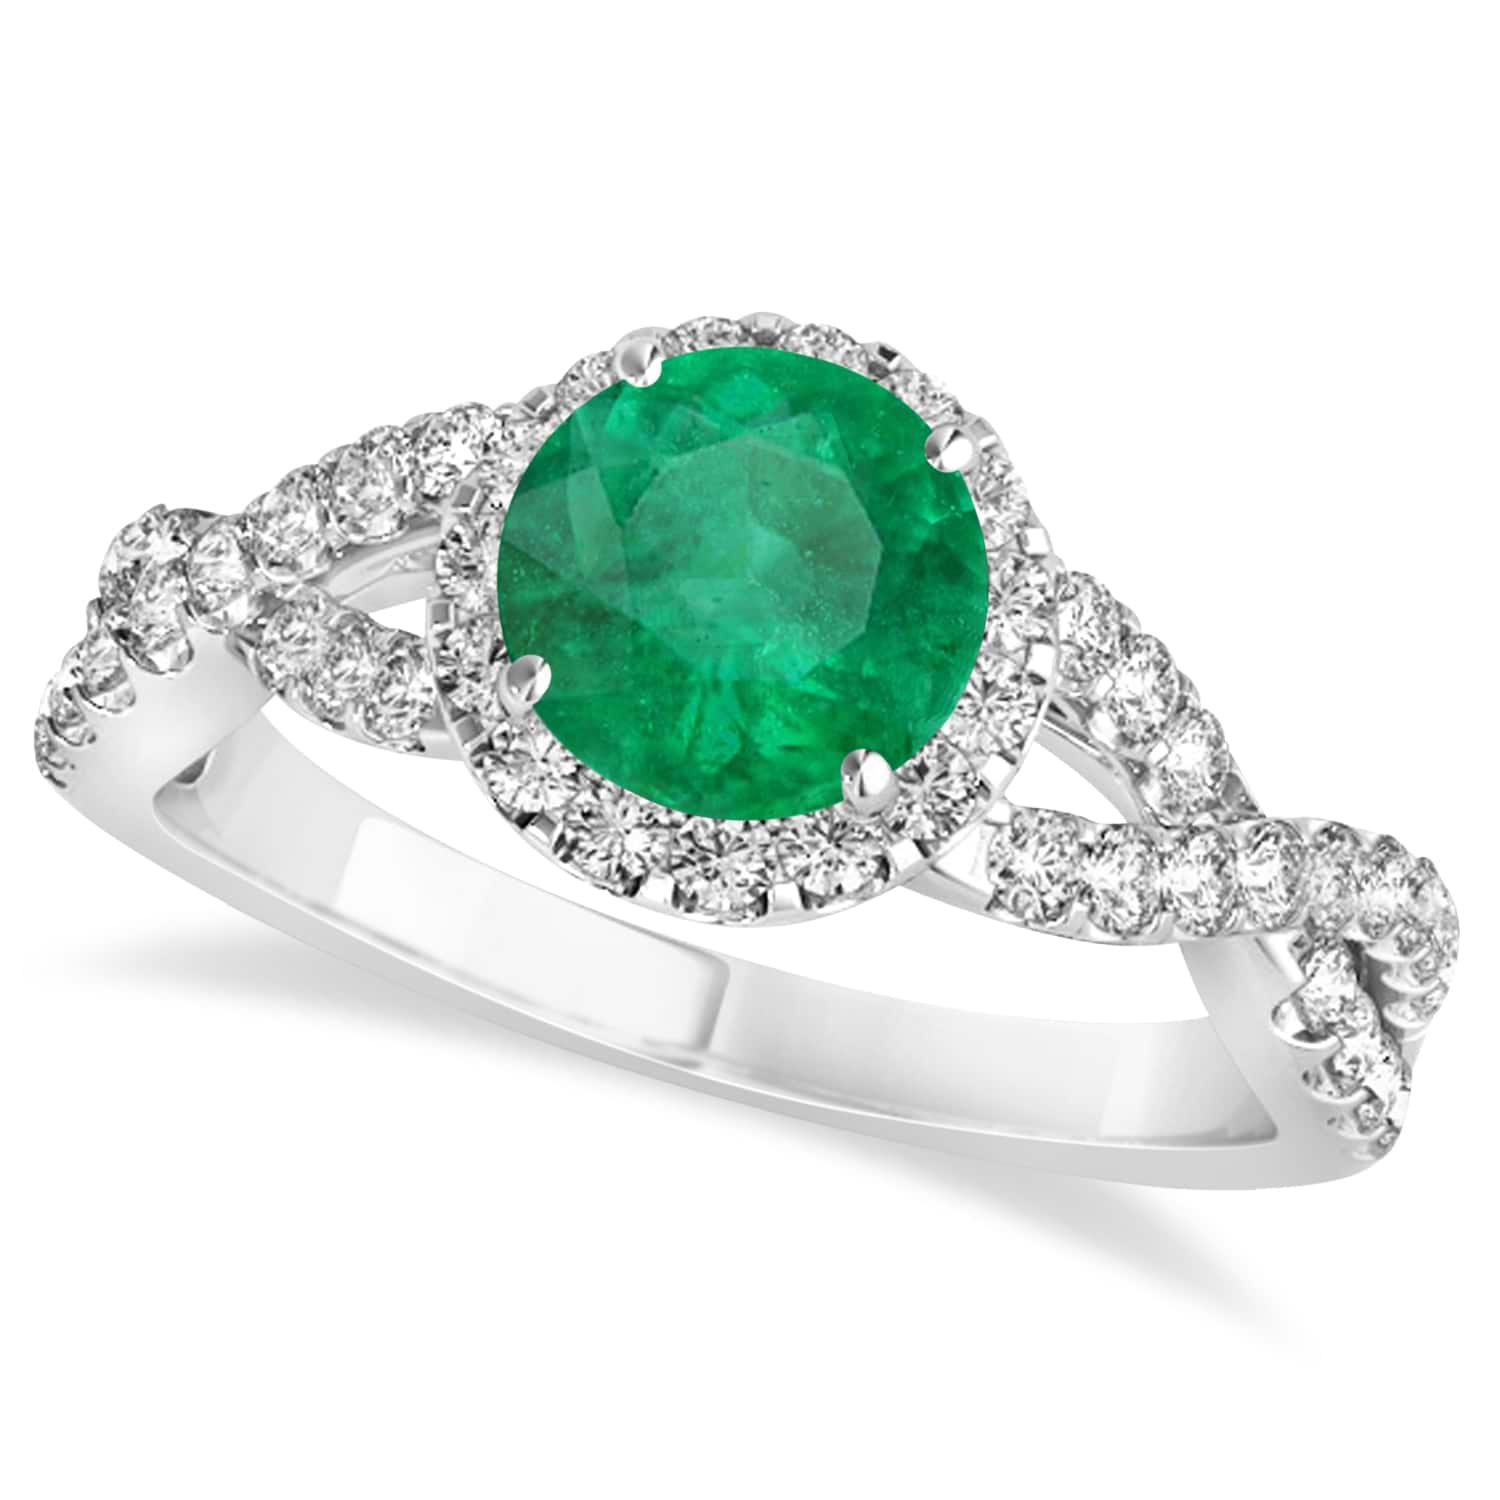 Emerald & Diamond Twisted Engagement Ring 14k White Gold 1.30ct